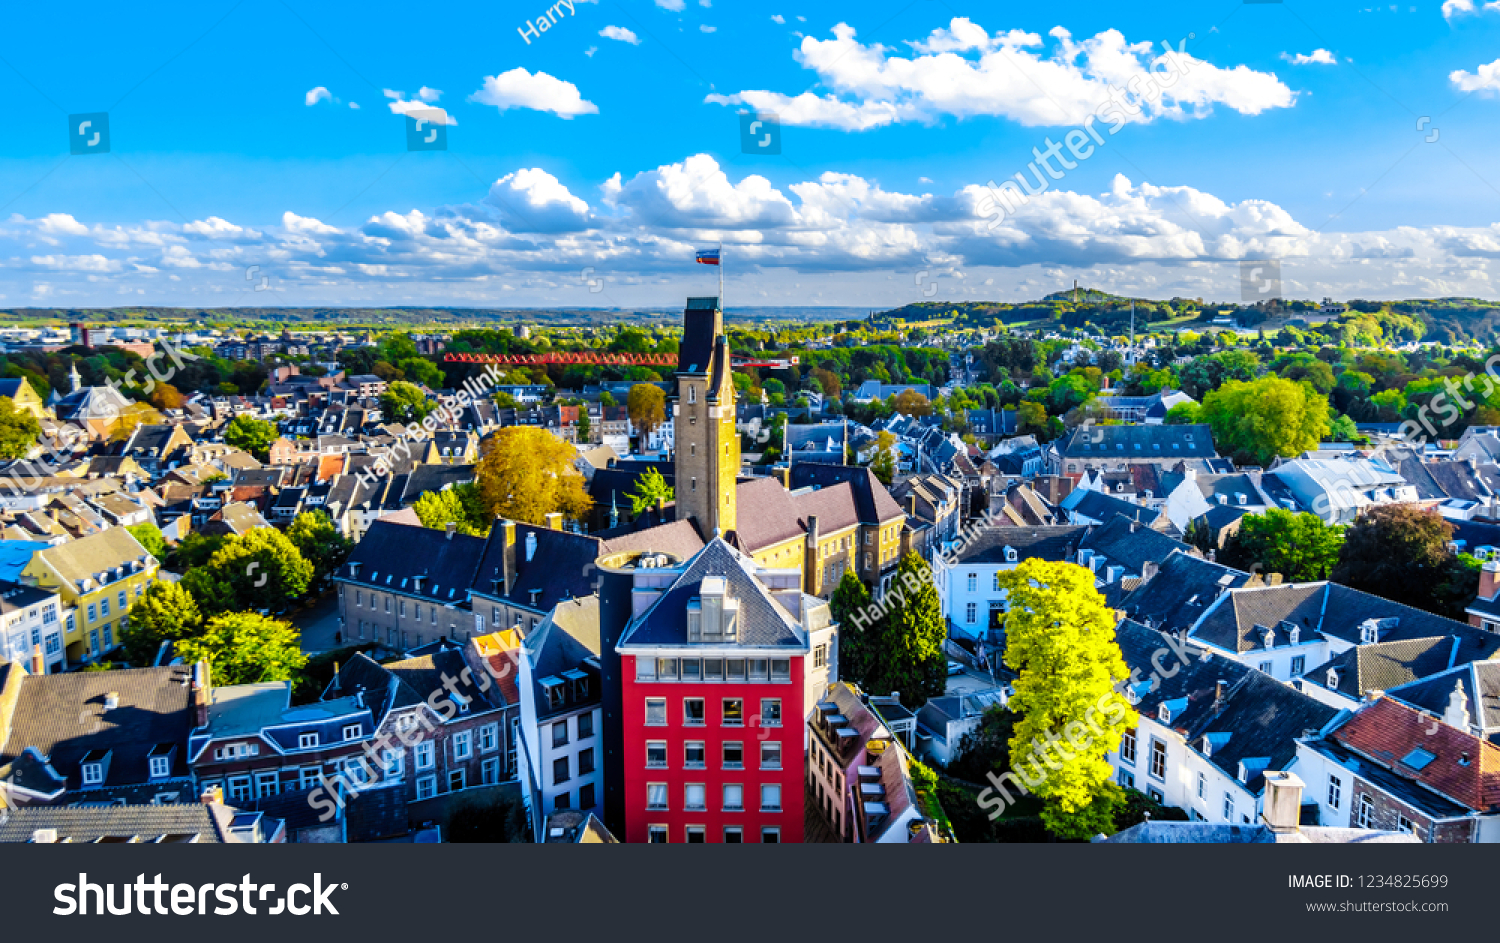 Aerial view of the historic city of Maastricht in the Netherlands as seen from the tower of the Sint Janskerk (St.John Church) which is at the Vrijthof square in the center of the city #1234825699